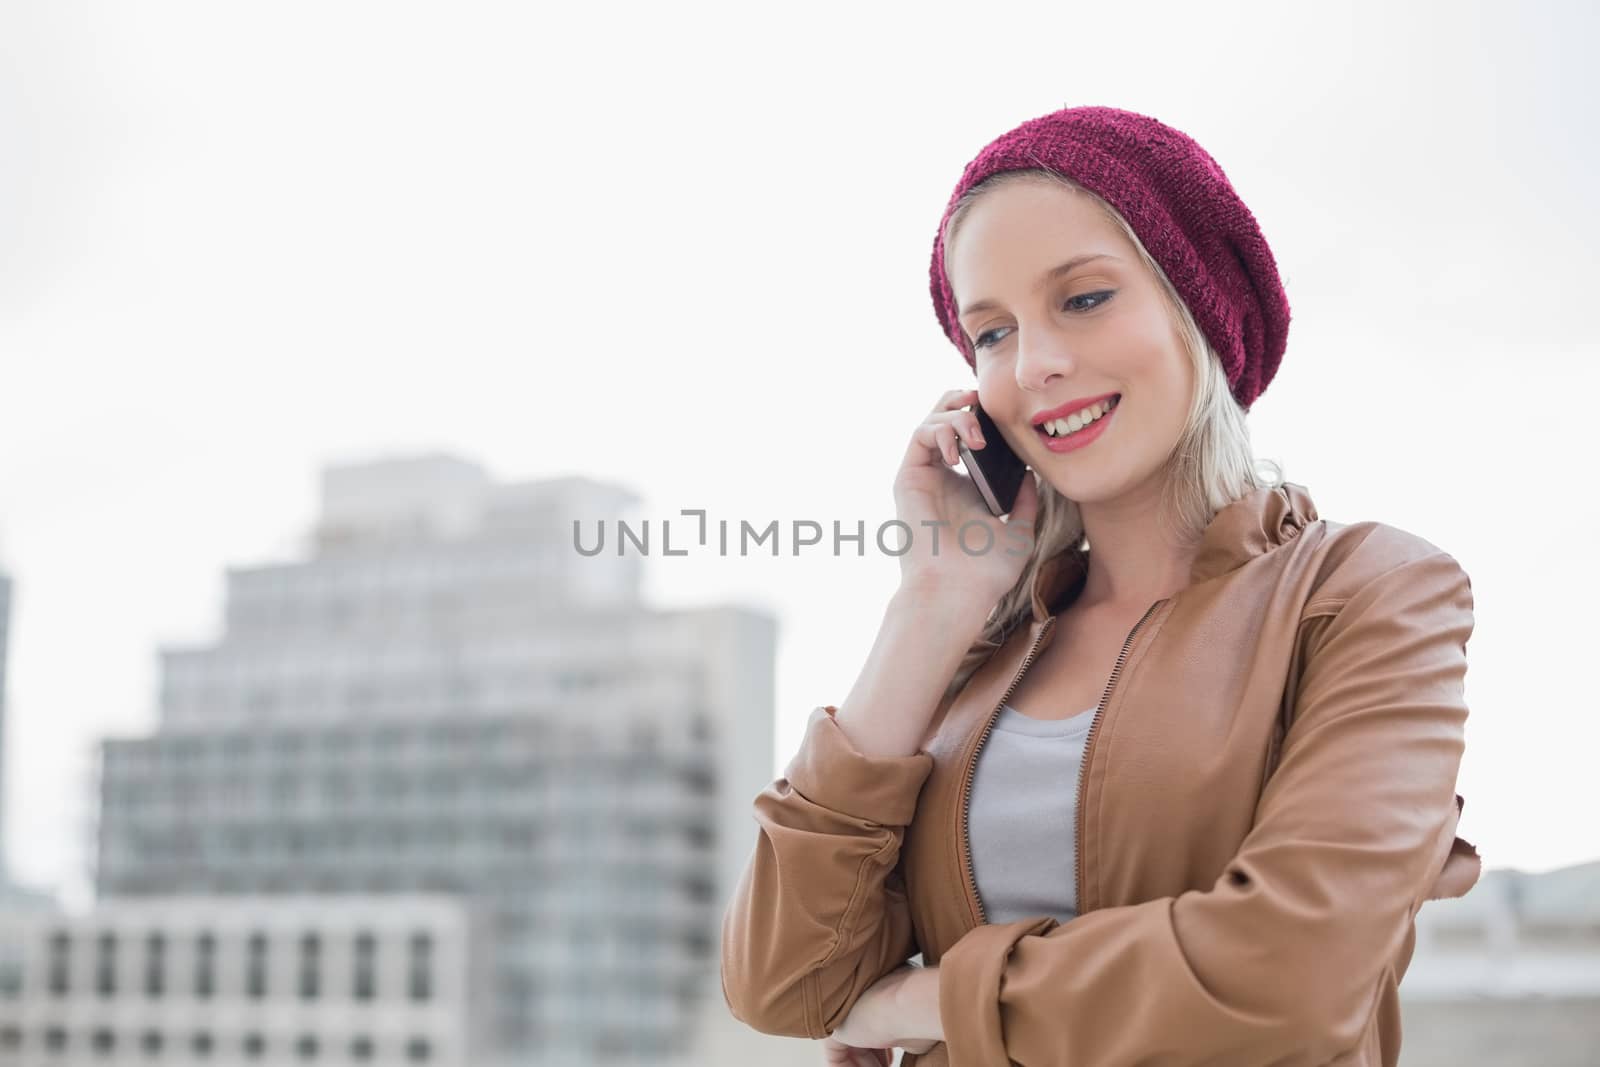 Smiling casual blonde on the phone outdoors on urban background